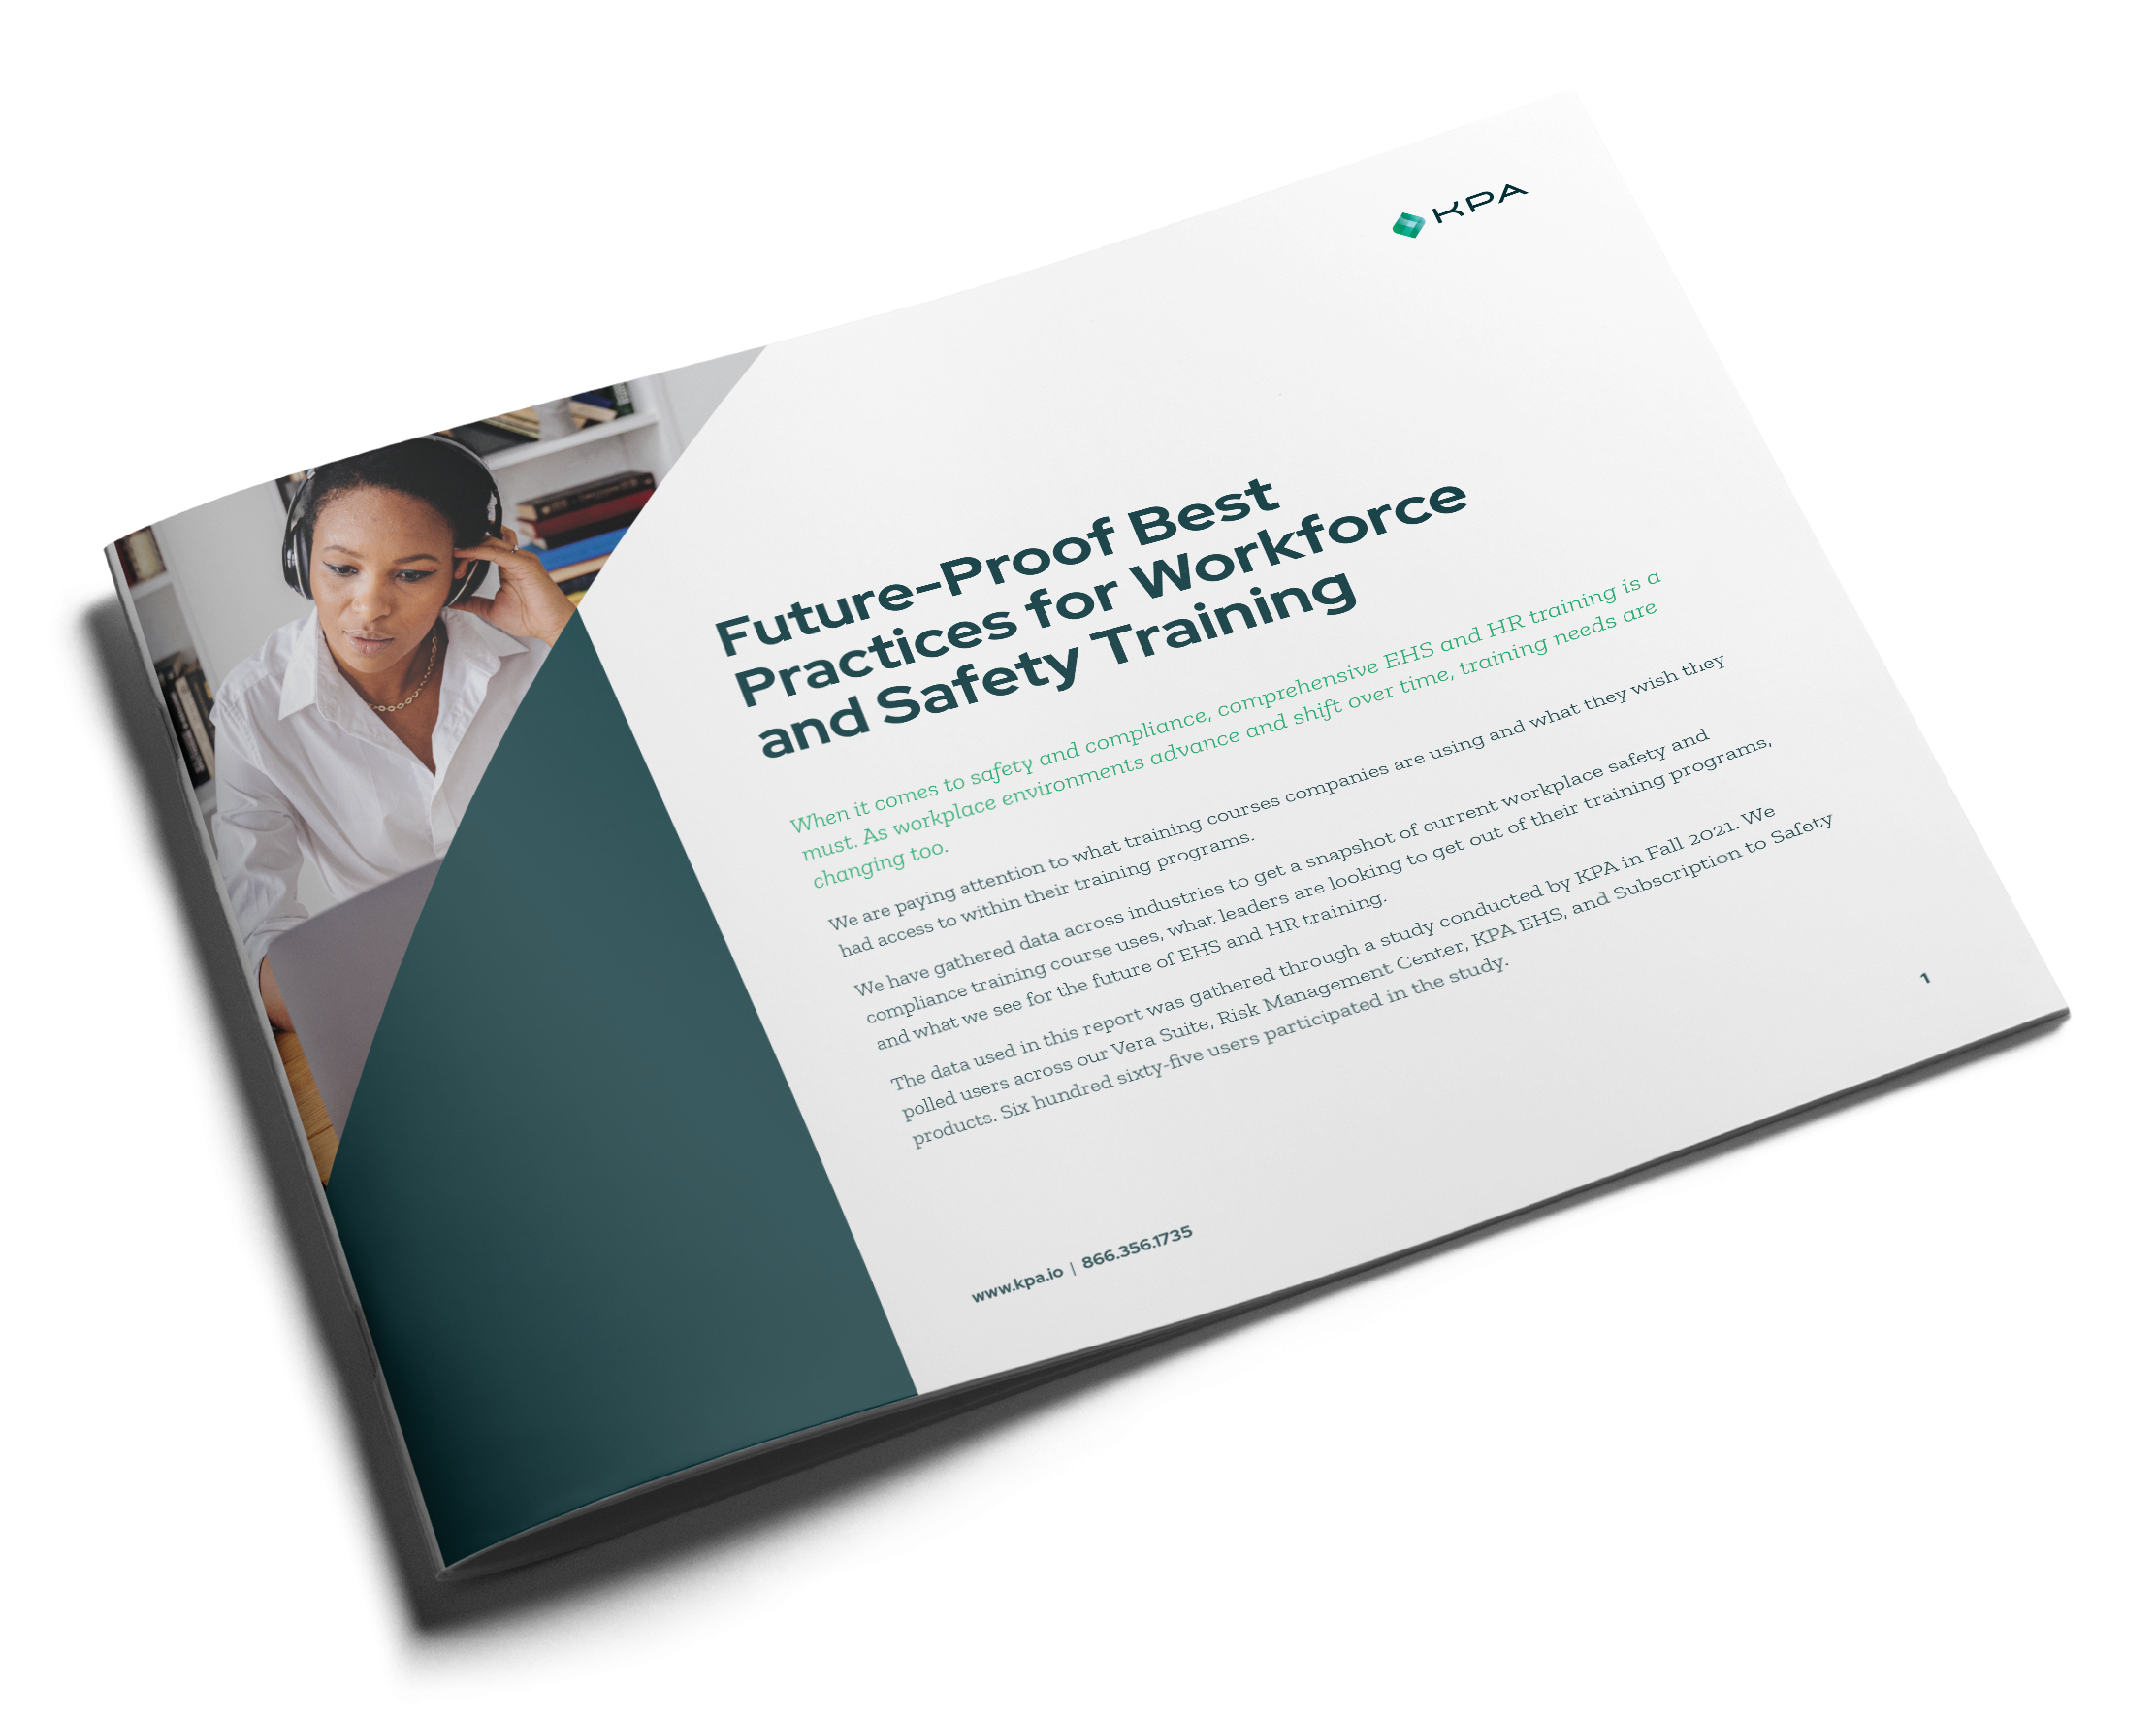 Future-Proof Best Practices for Workforce and Safety Training Thumbnail